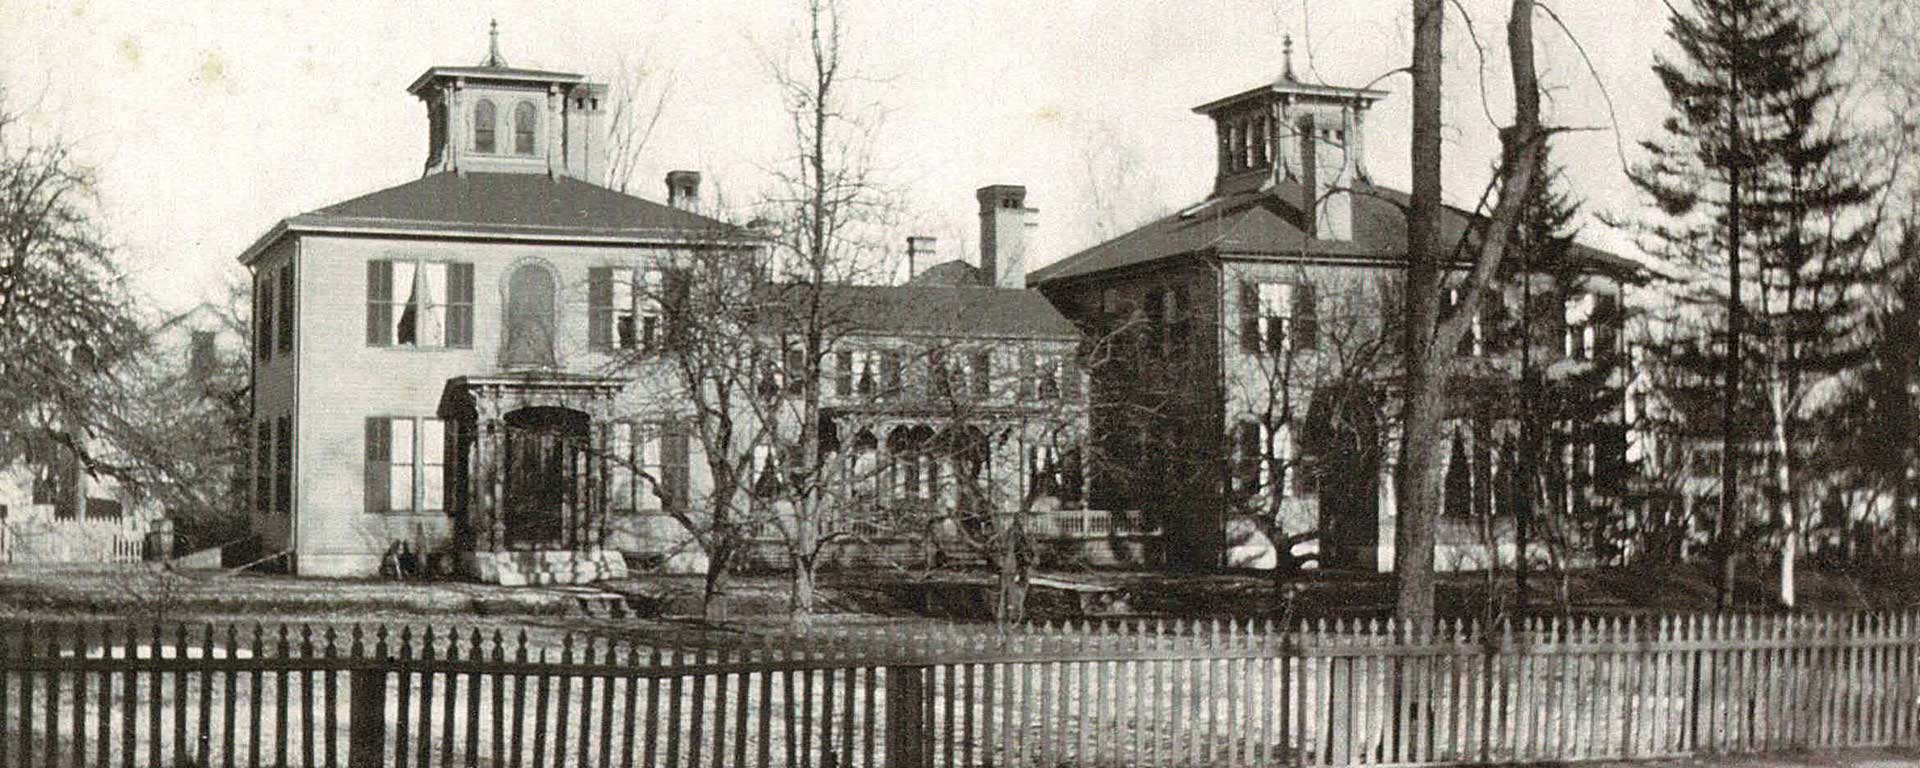 Haunted and Ghostly Blaine House Augusta